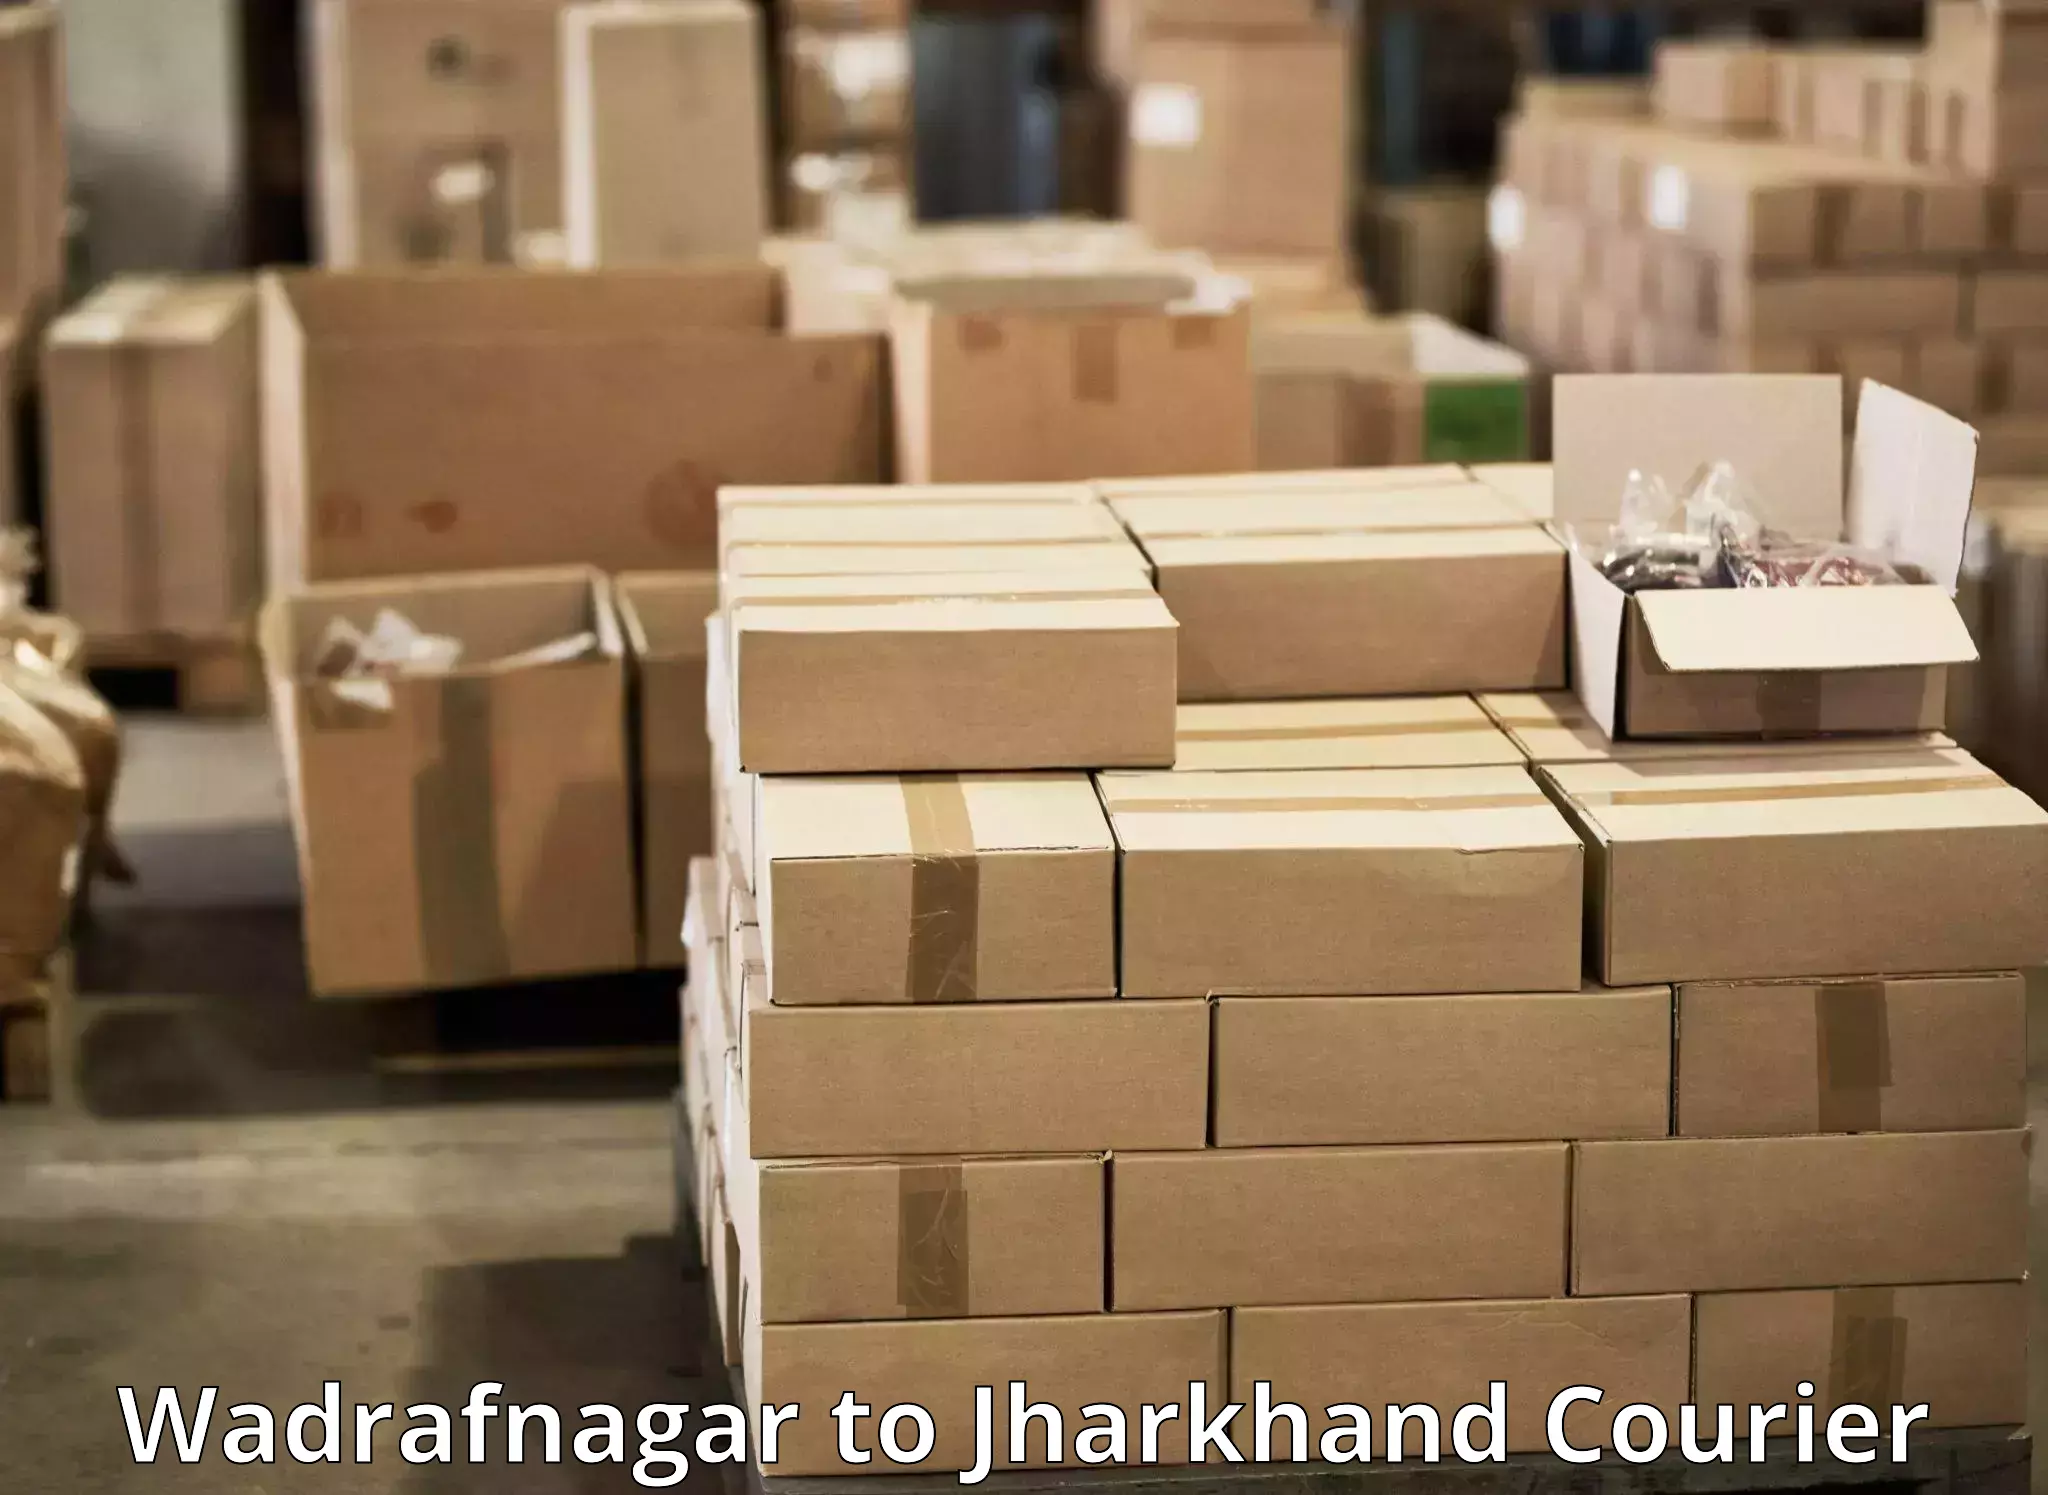 Reliable delivery network Wadrafnagar to Birla Institute of Technology Ranchi